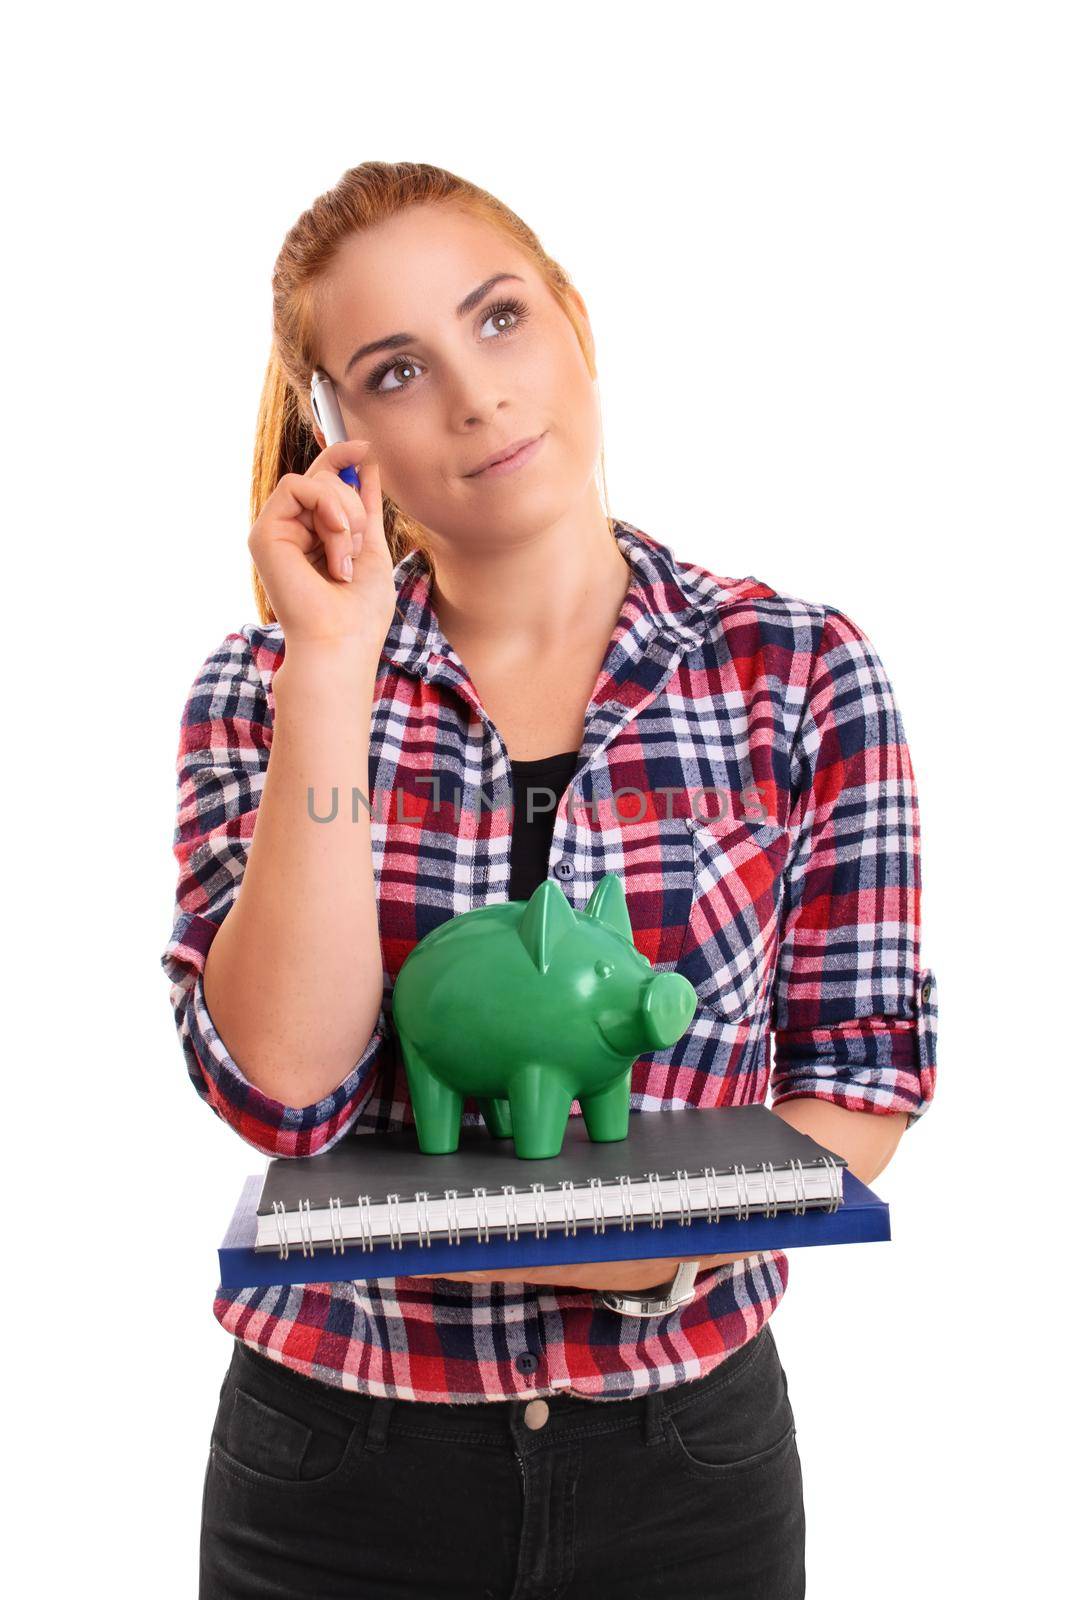 Female student holding green piggy bank and thinking by Mendelex